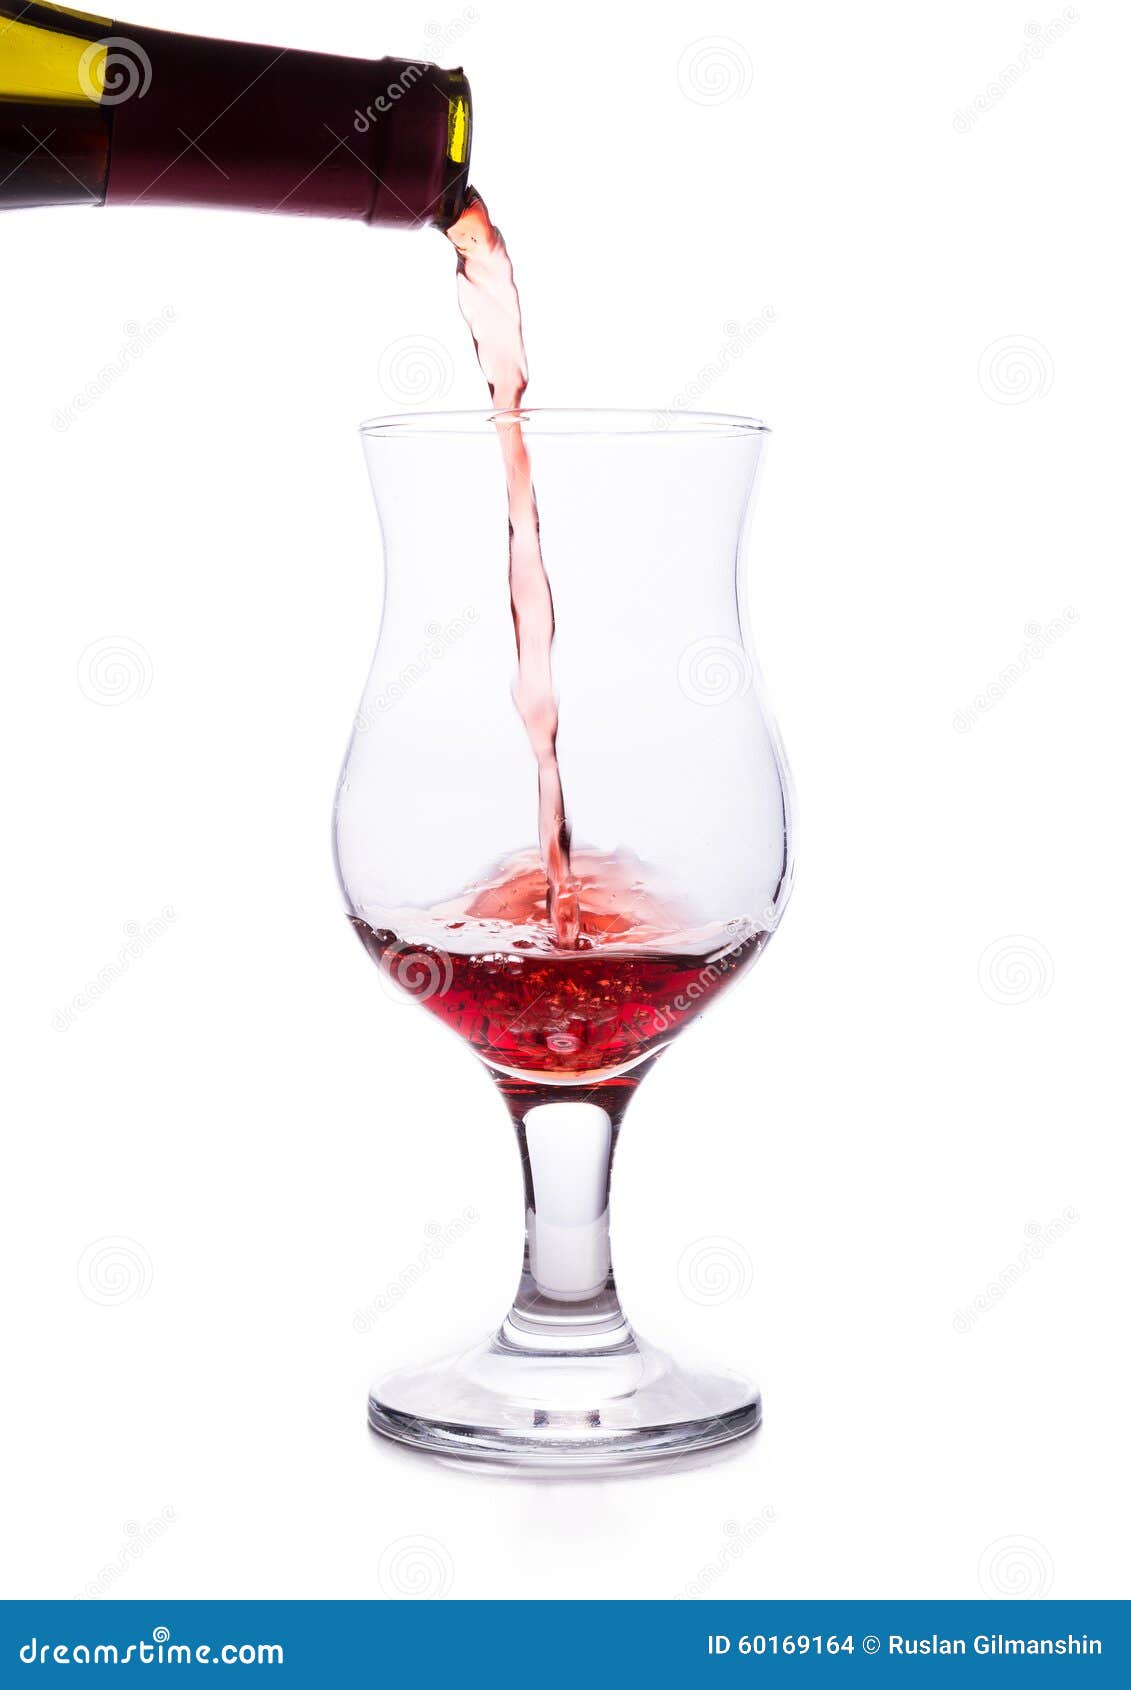 Download Clear Glass And A Bottle Of Red Wine Stock Photo Image Of Drink Crystal 60169164 Yellowimages Mockups